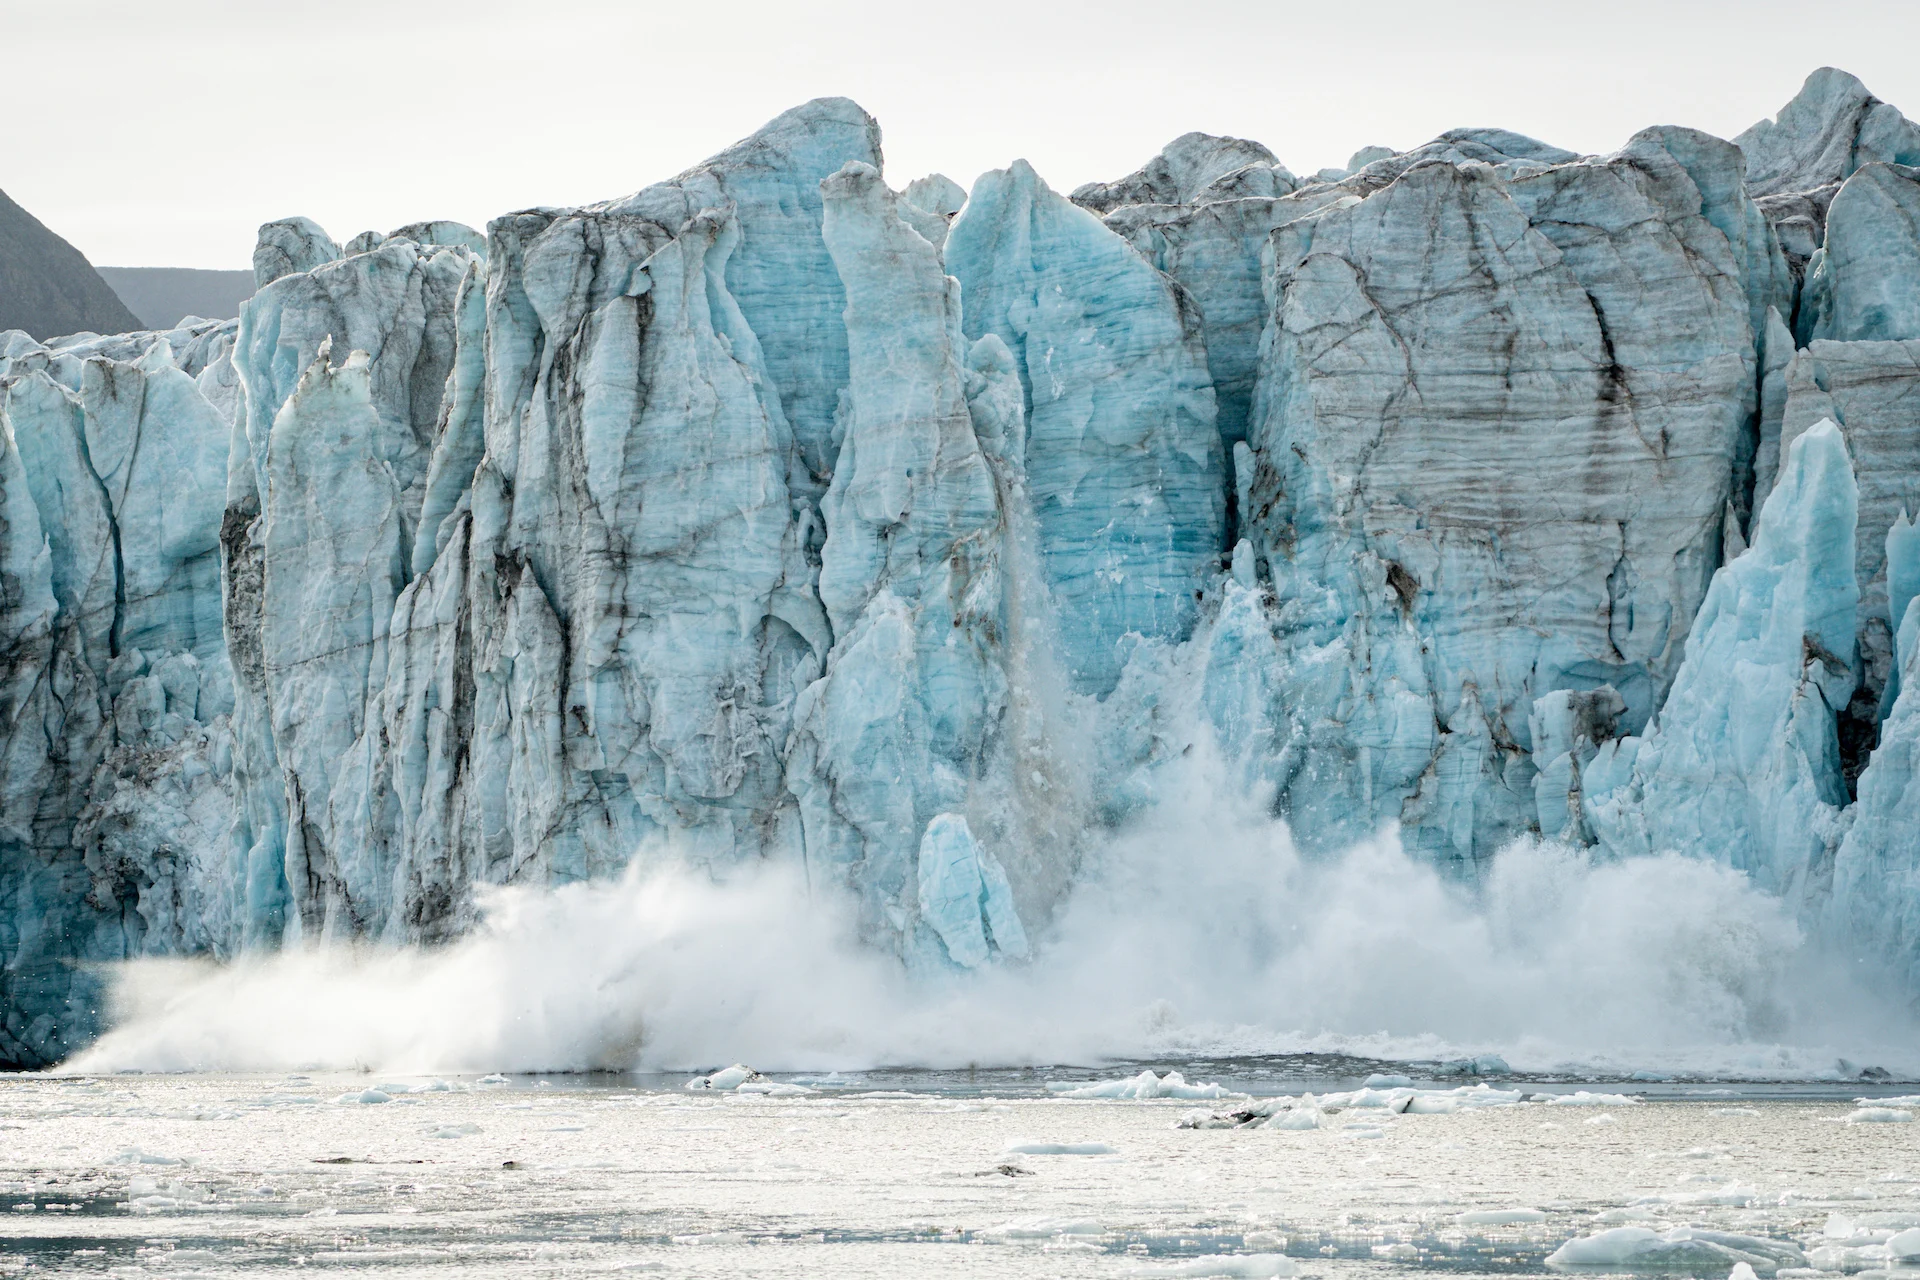 How the fastest-warming place on Earth copes with rapid glacial melt